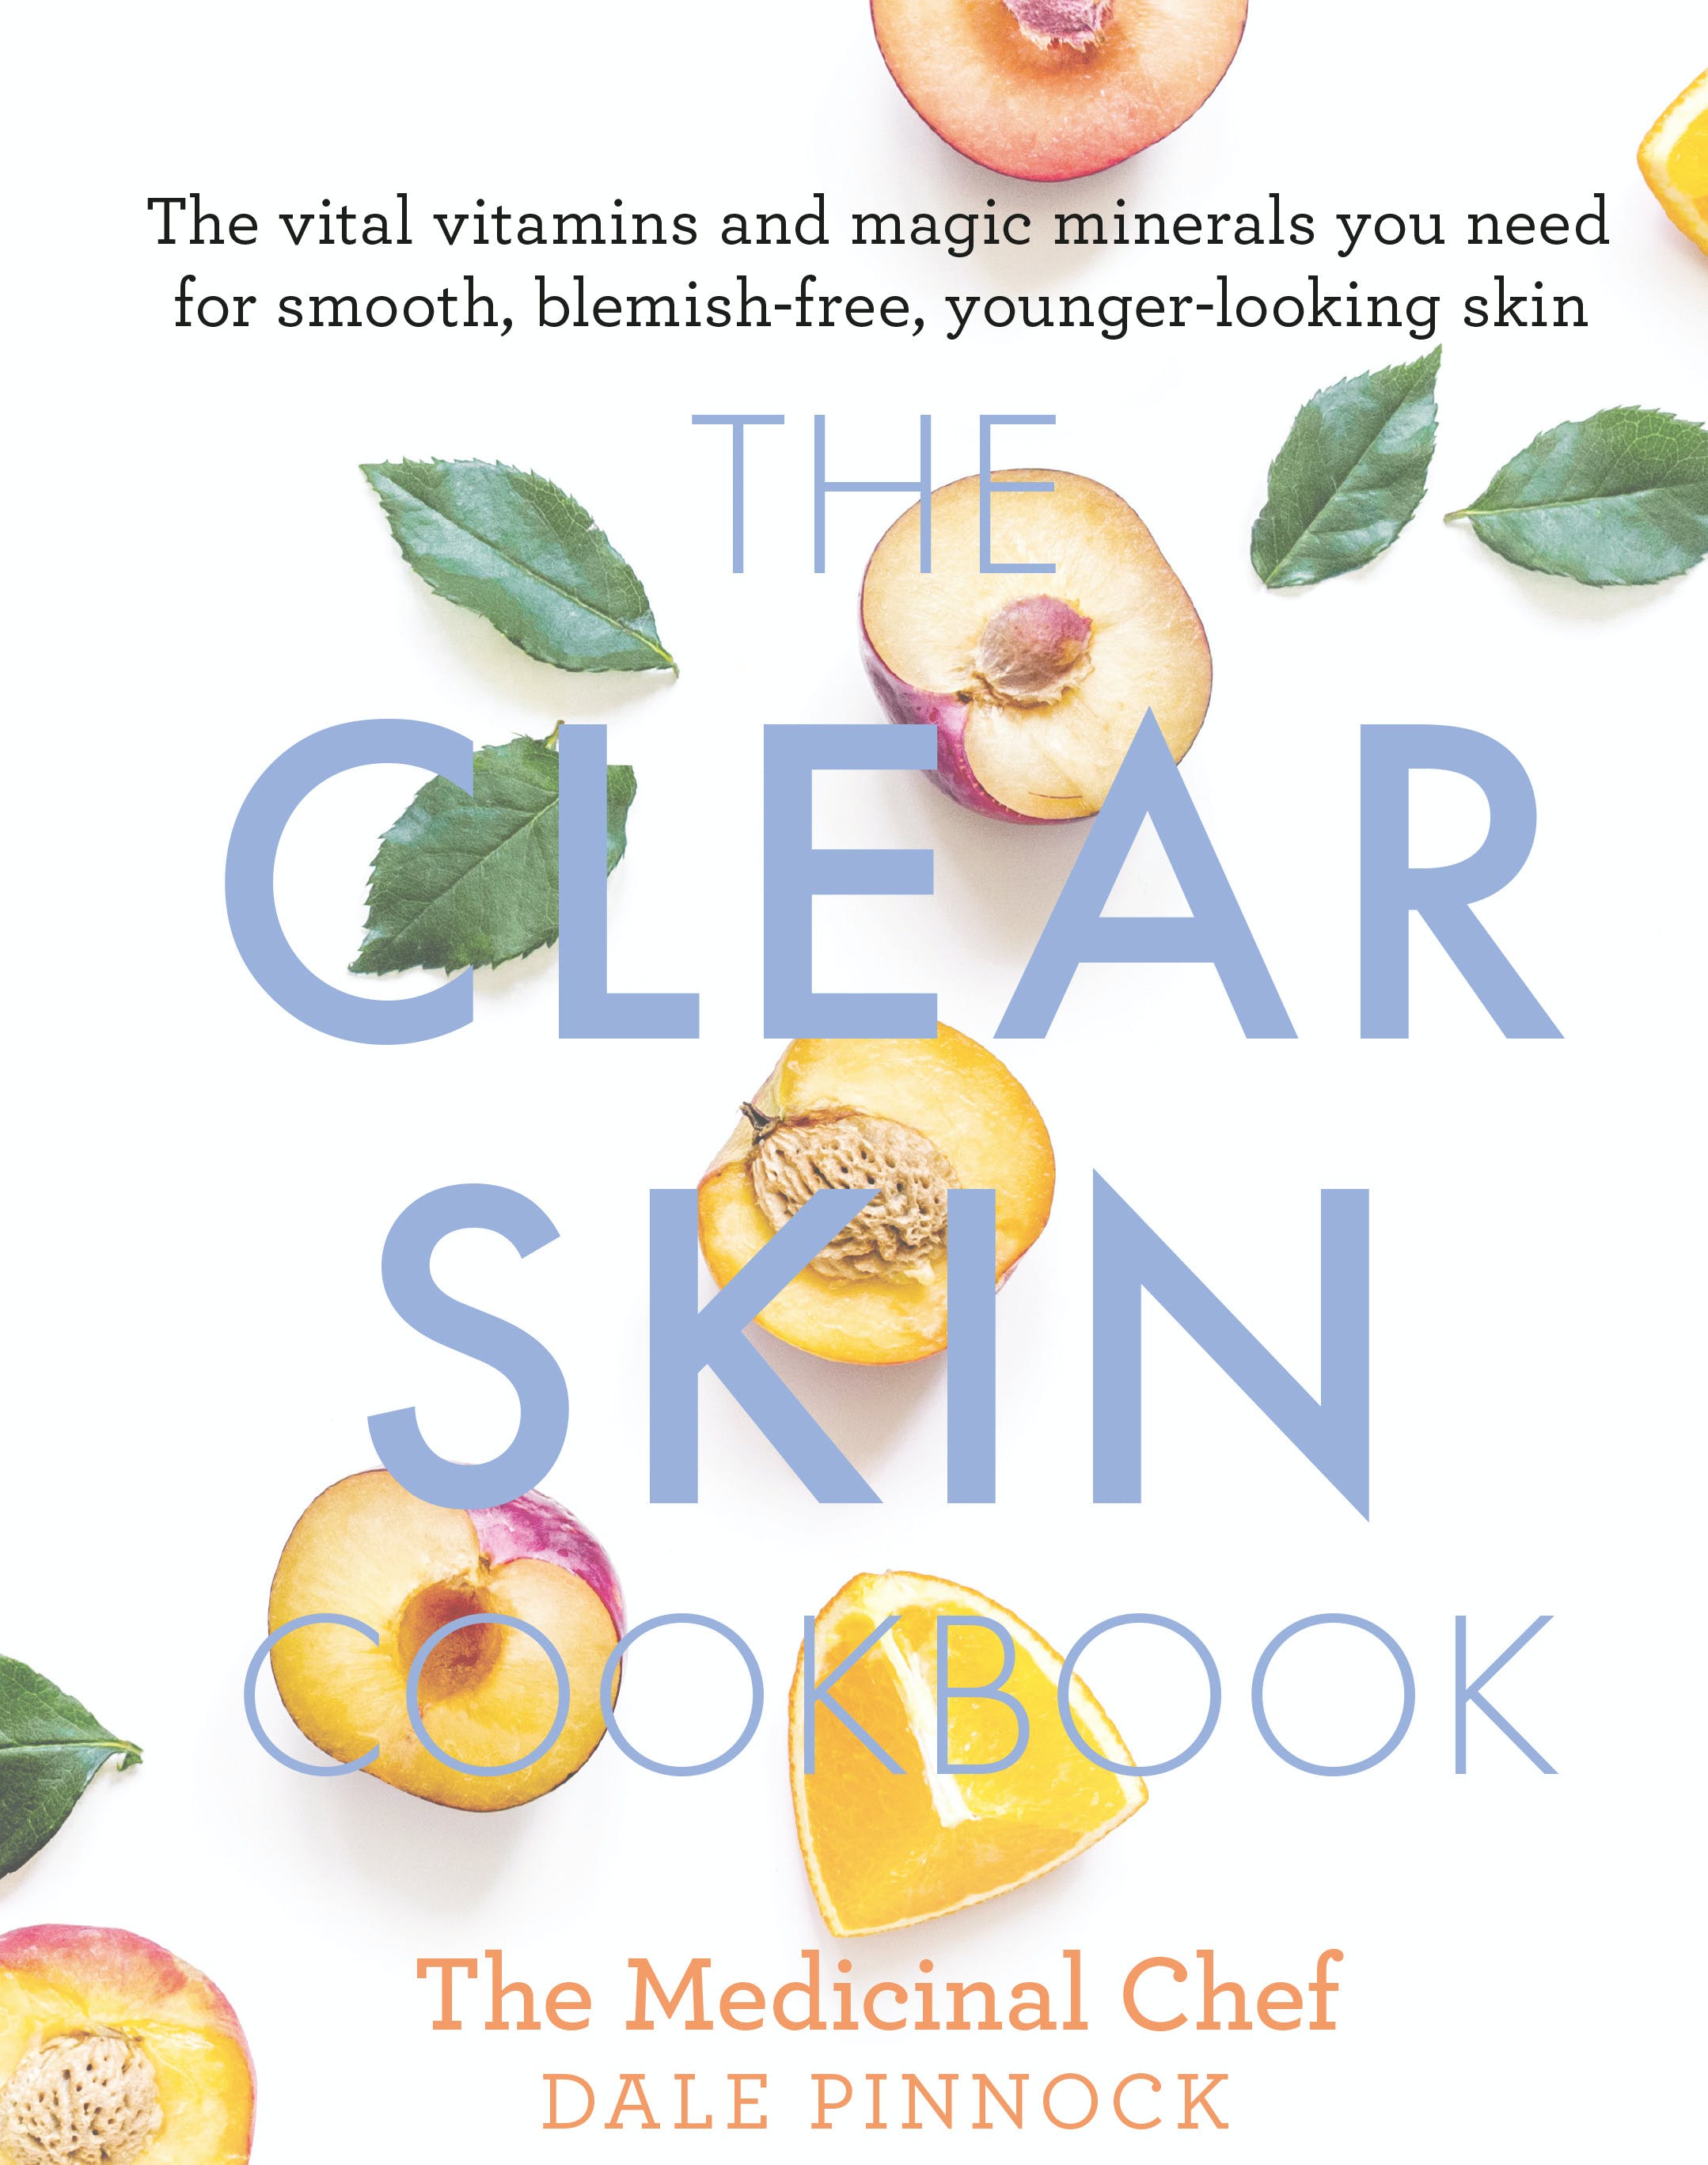 The Clear Skin CookBook by Dale Pinnock